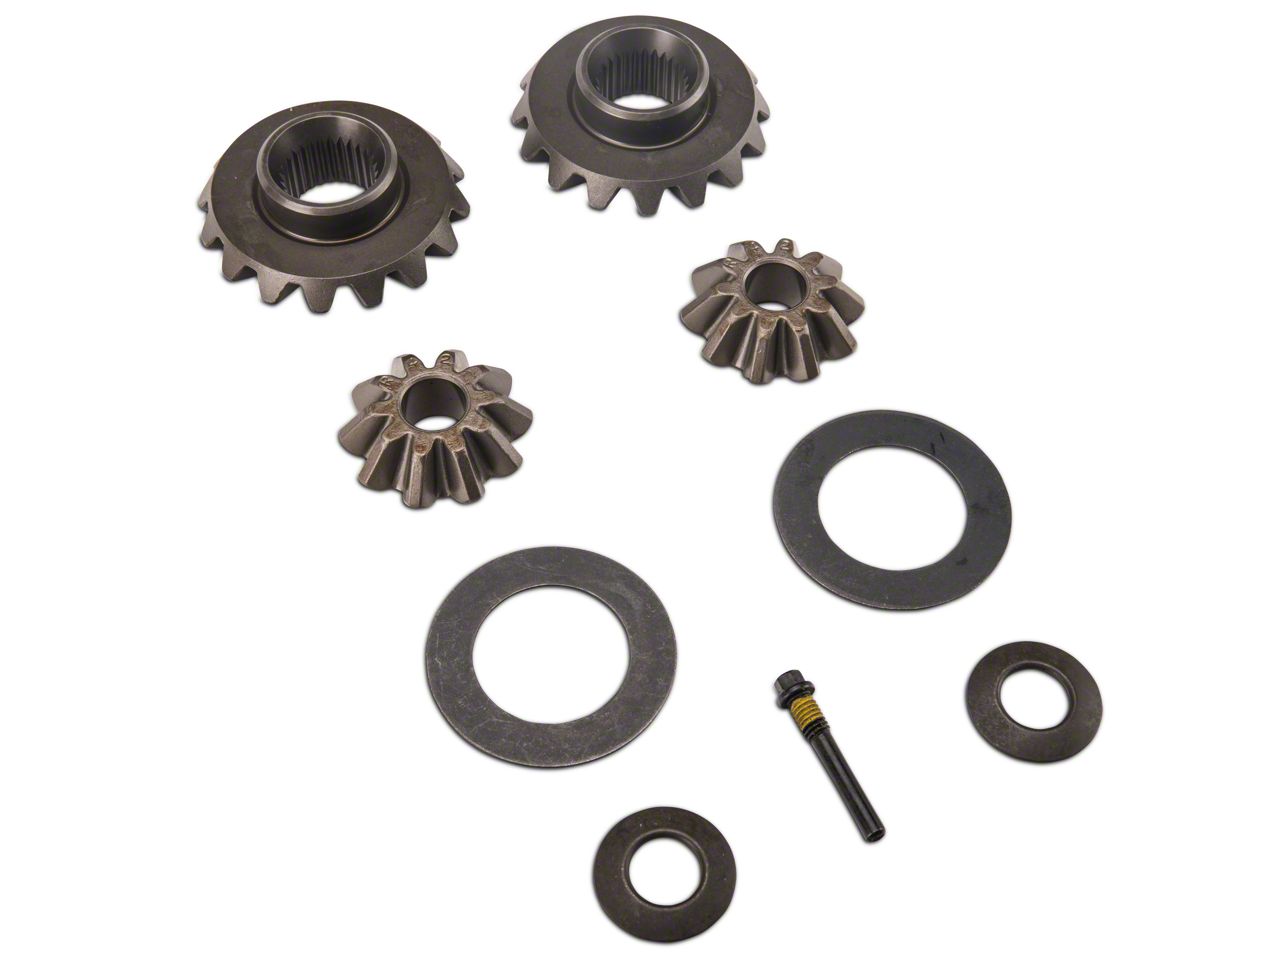 Ford differential spider gears #4